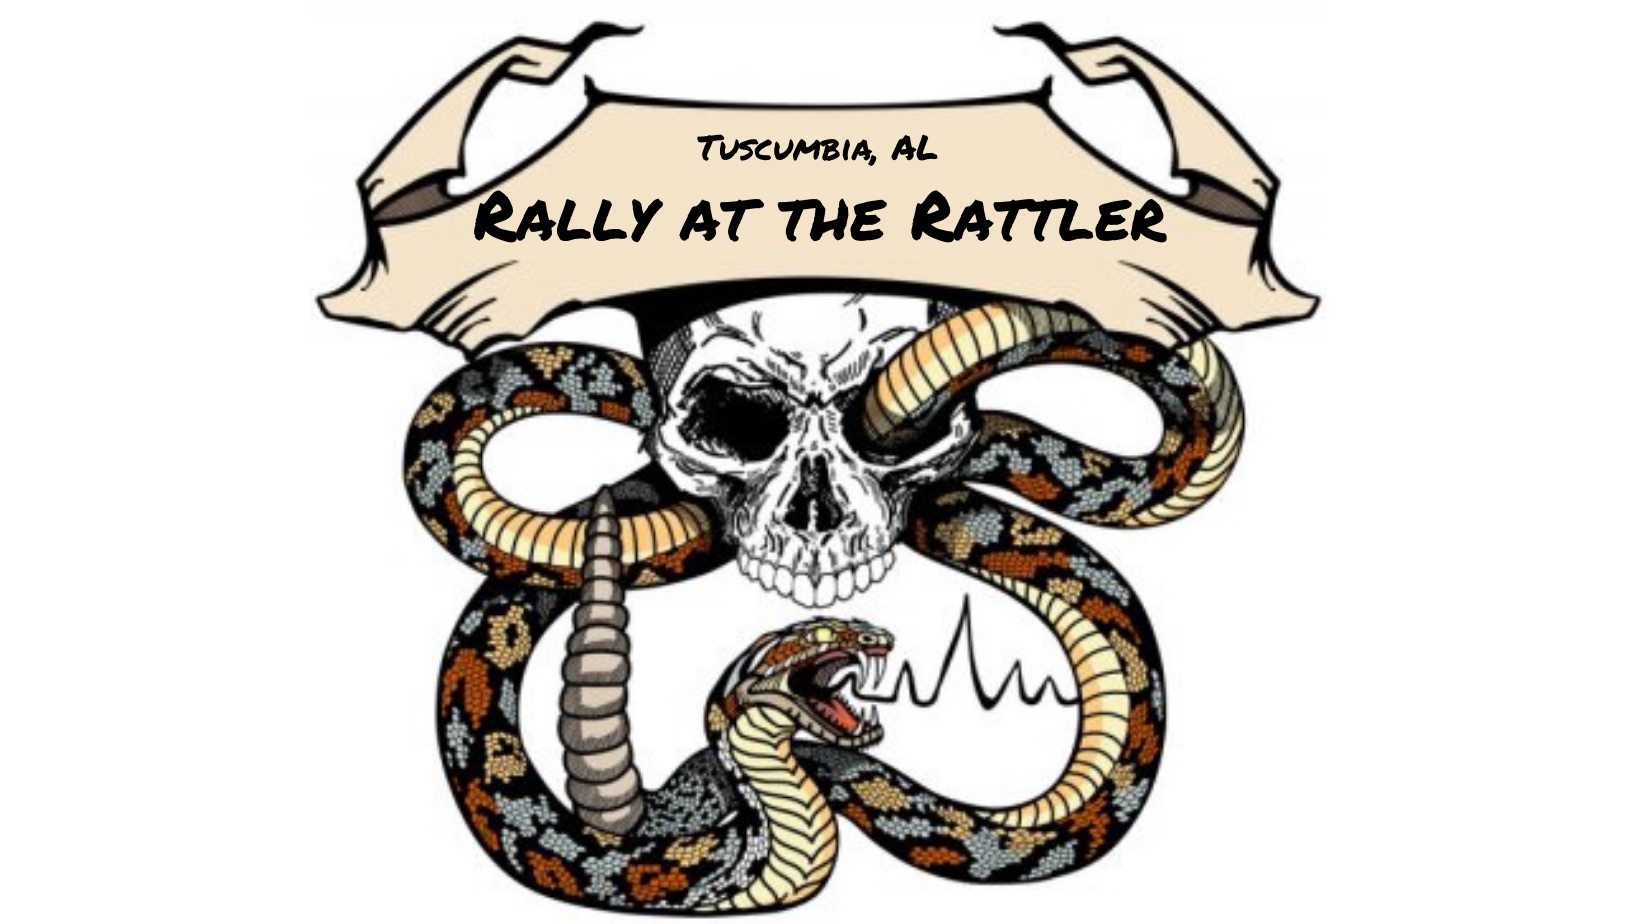 Rally at the Rattler 21+ motorcycle rally in the heart of beautiful